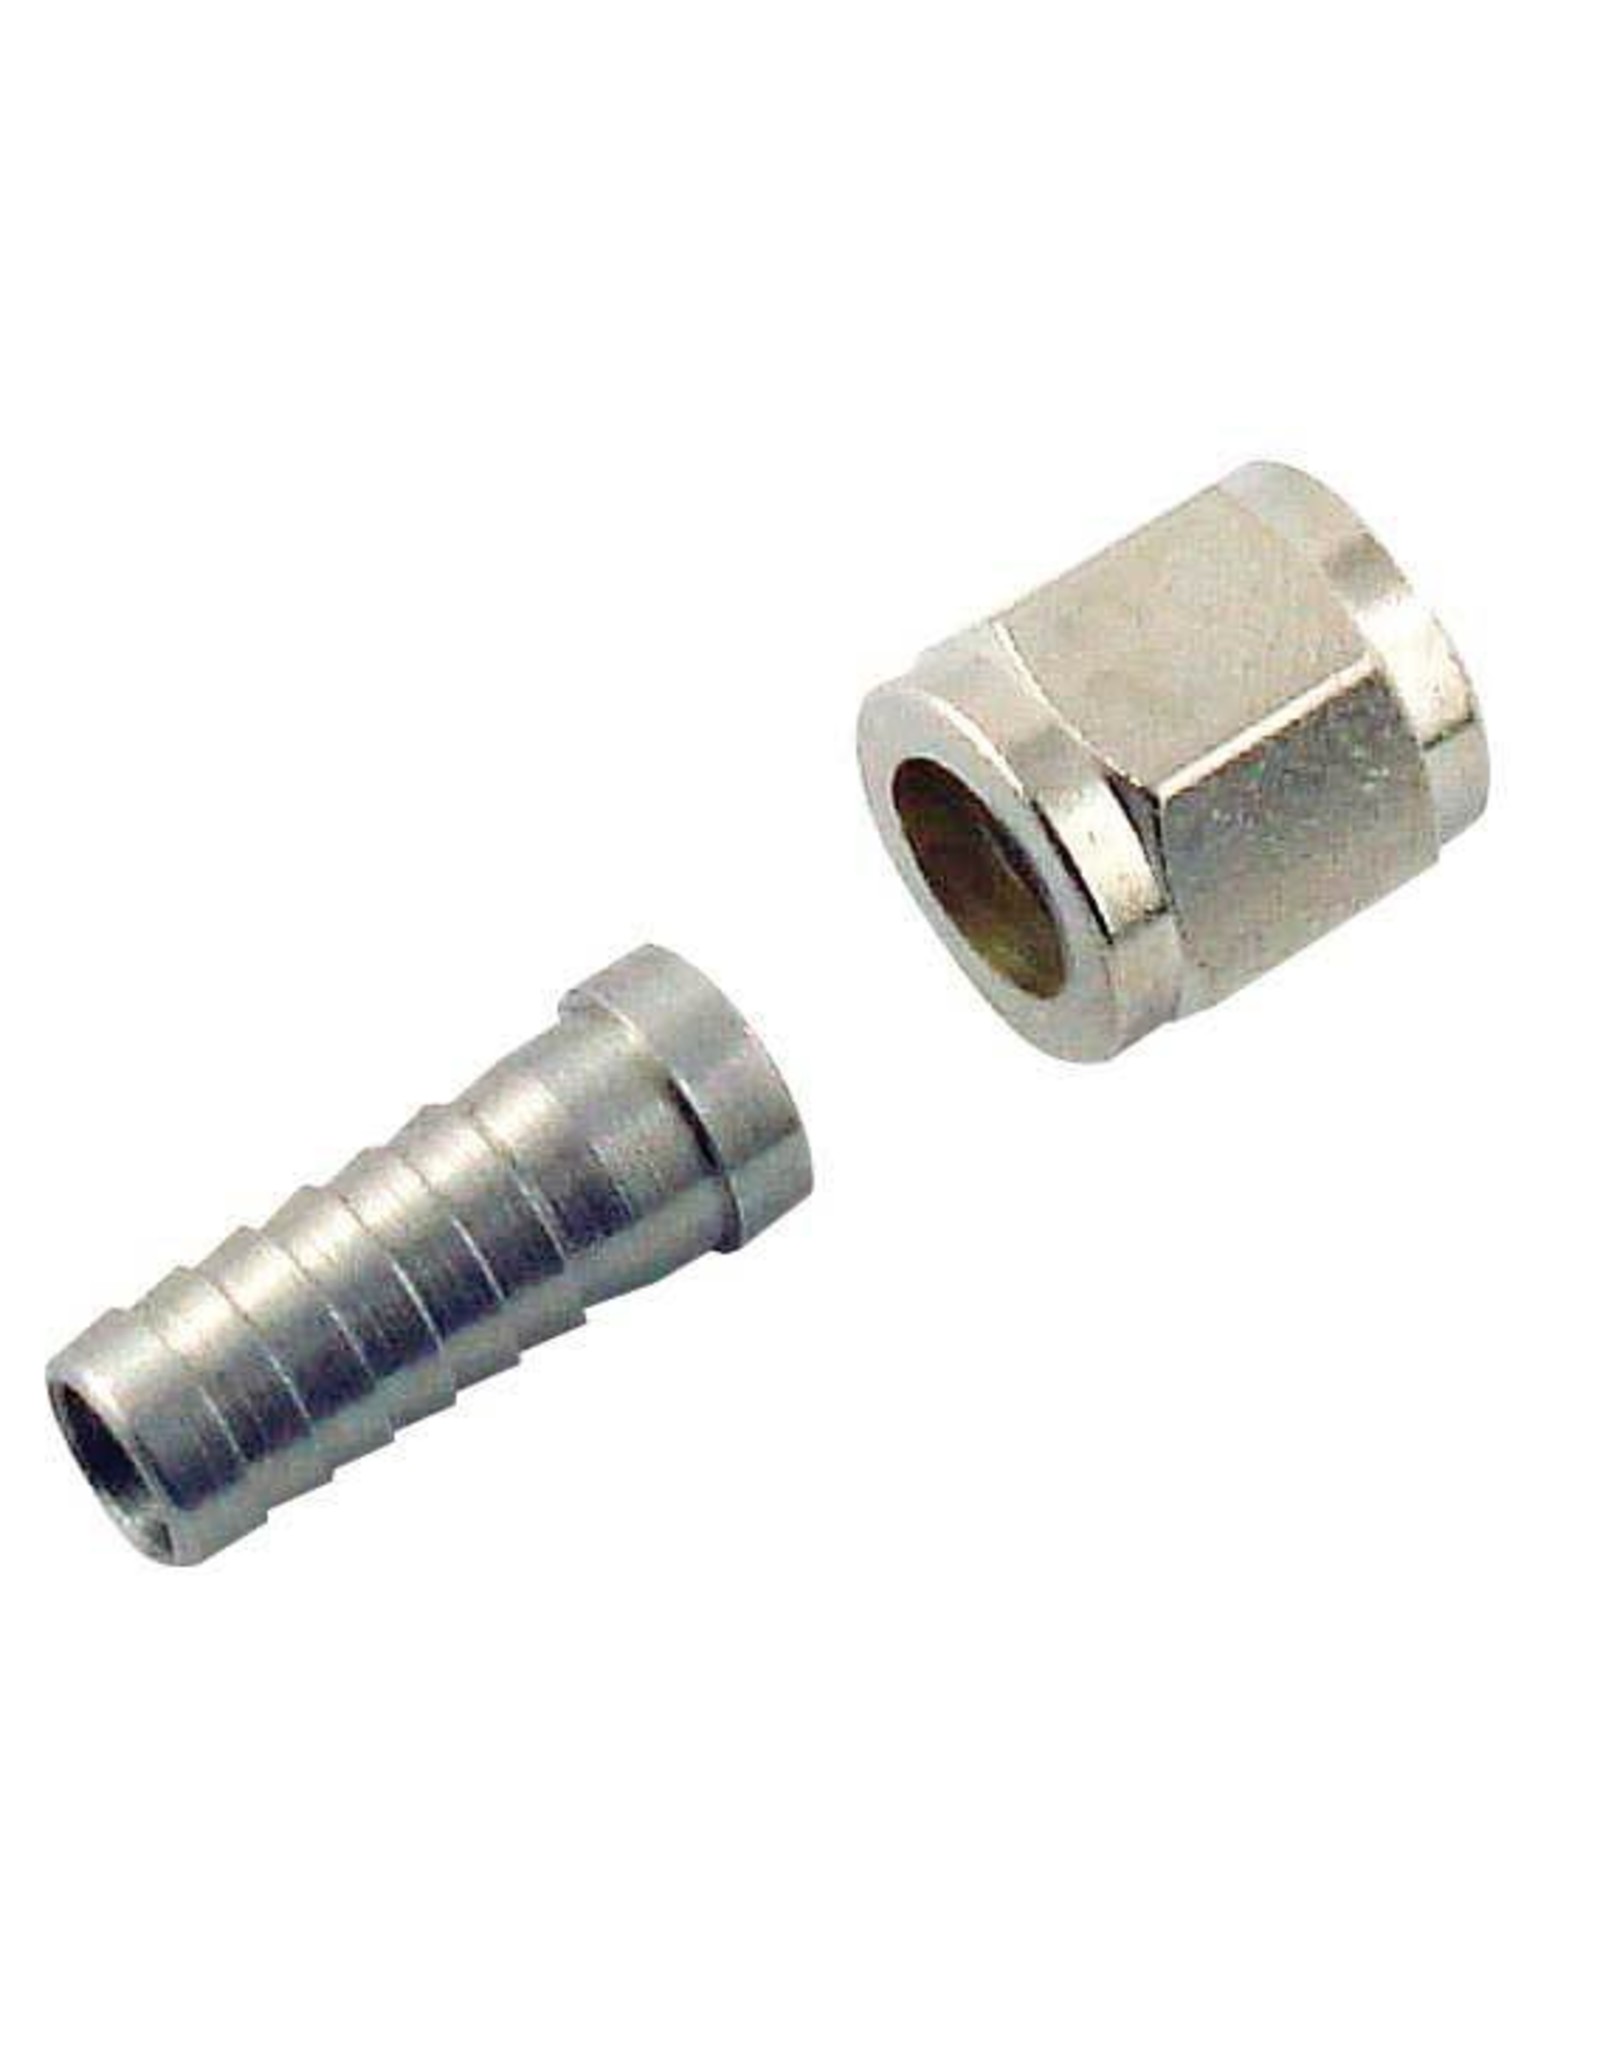 Gas Nut 5/16 Barb Stem And 1/4 Swivel Set Connector